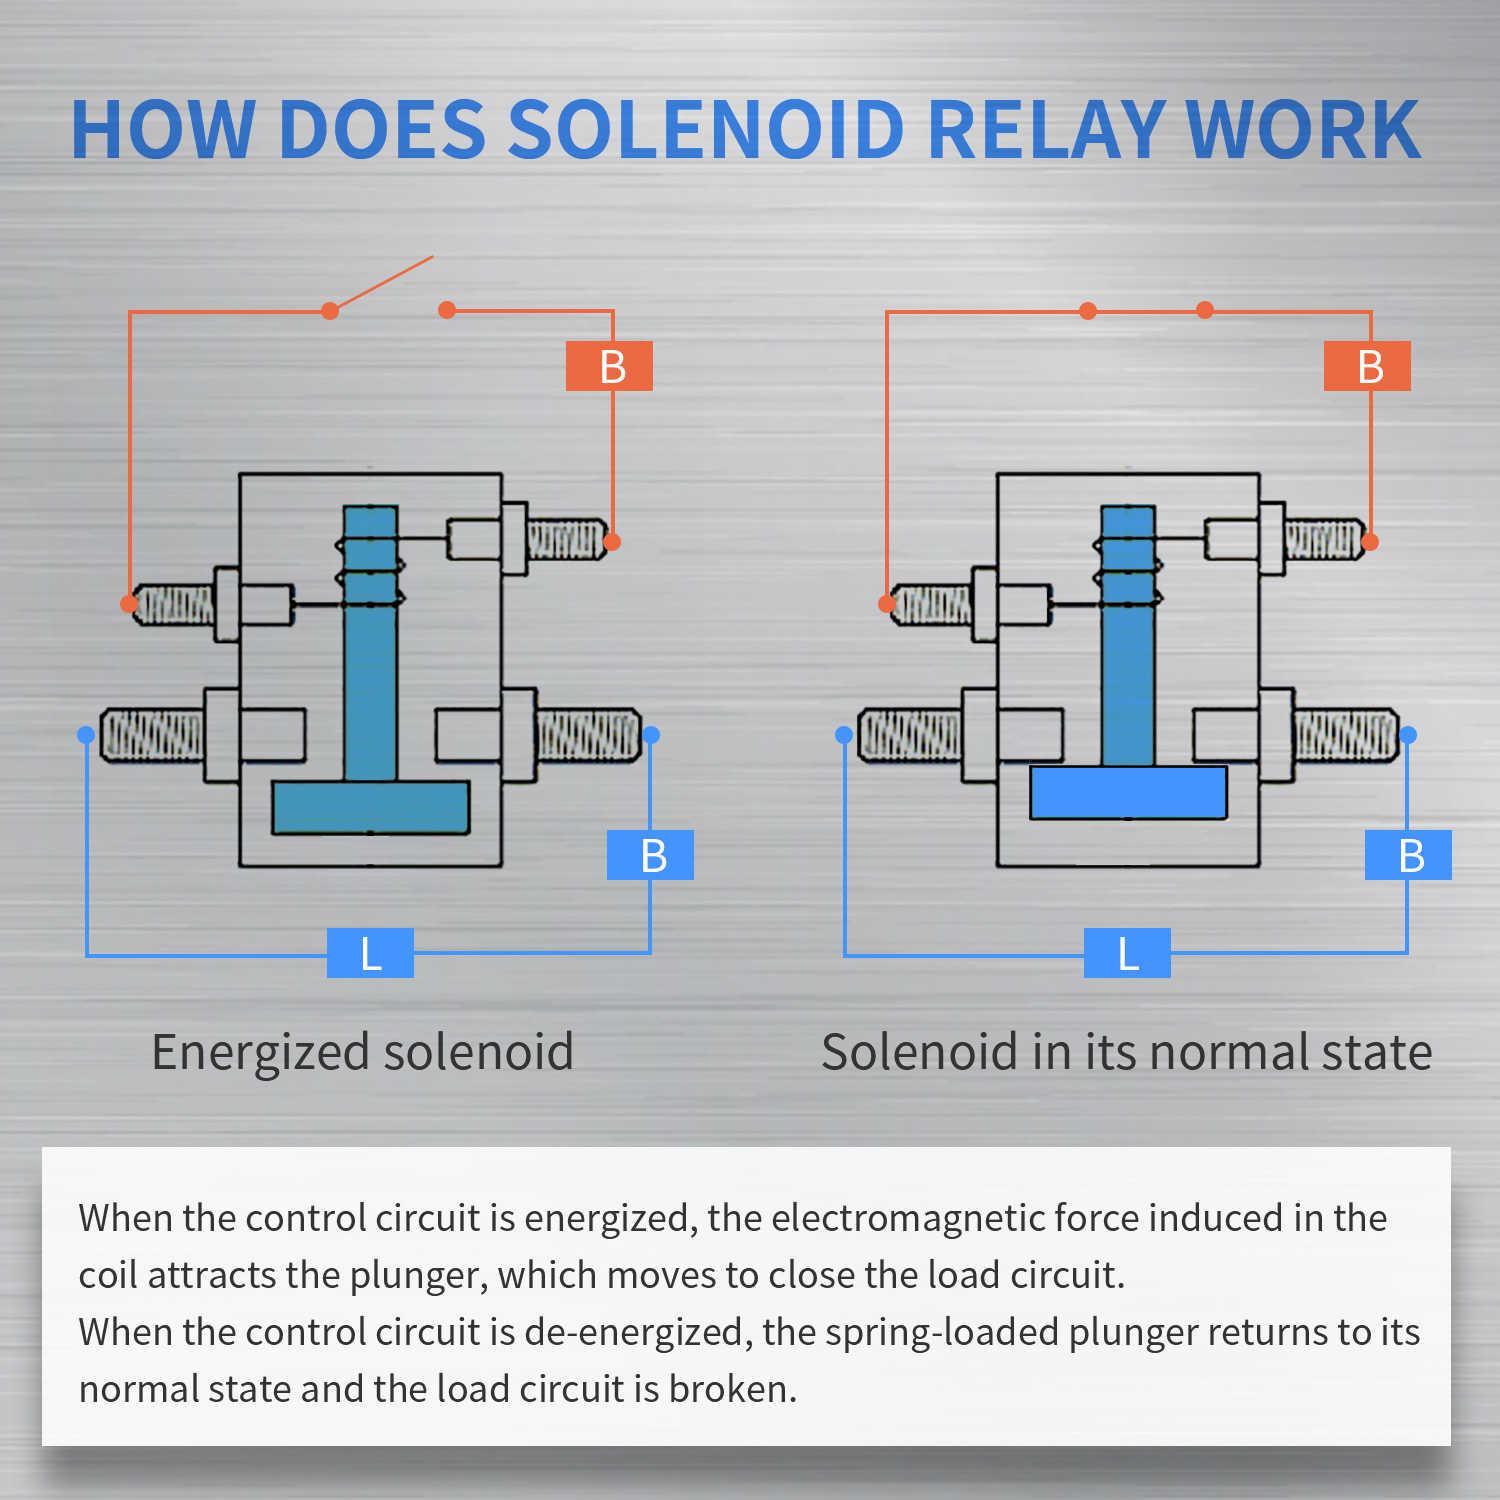 How does solenoid relay work